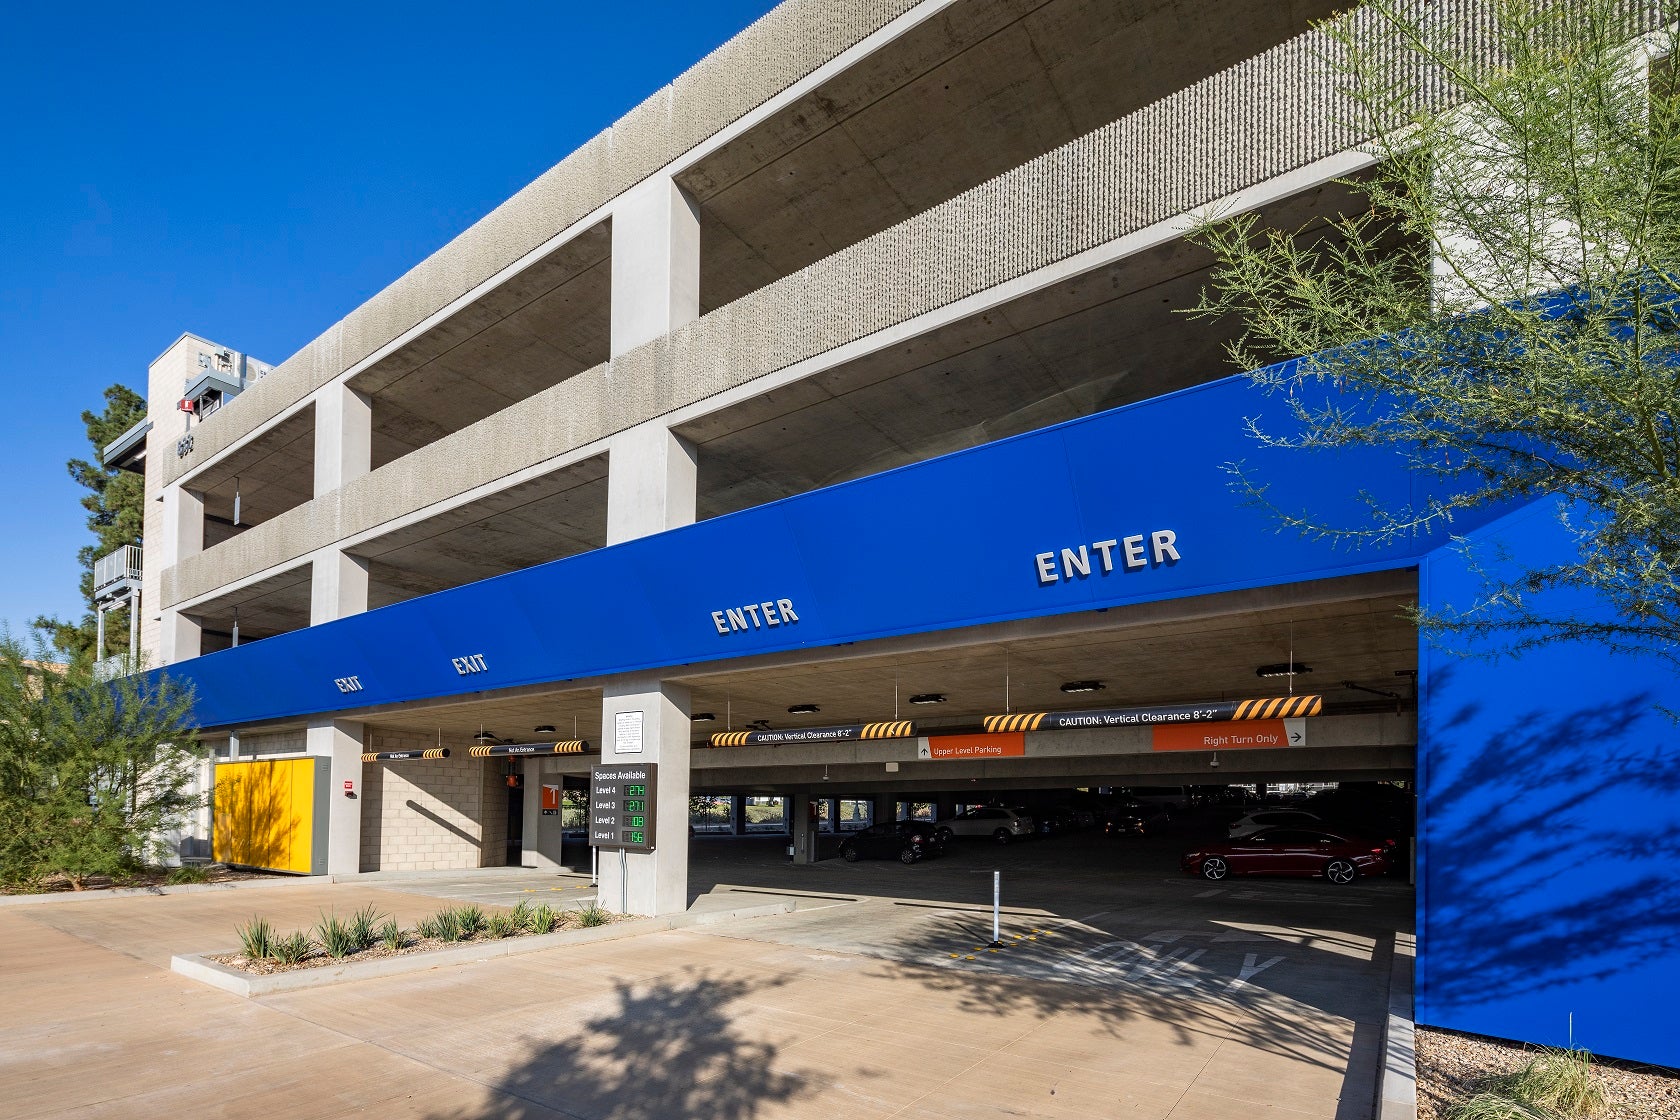 Exit of parking structure